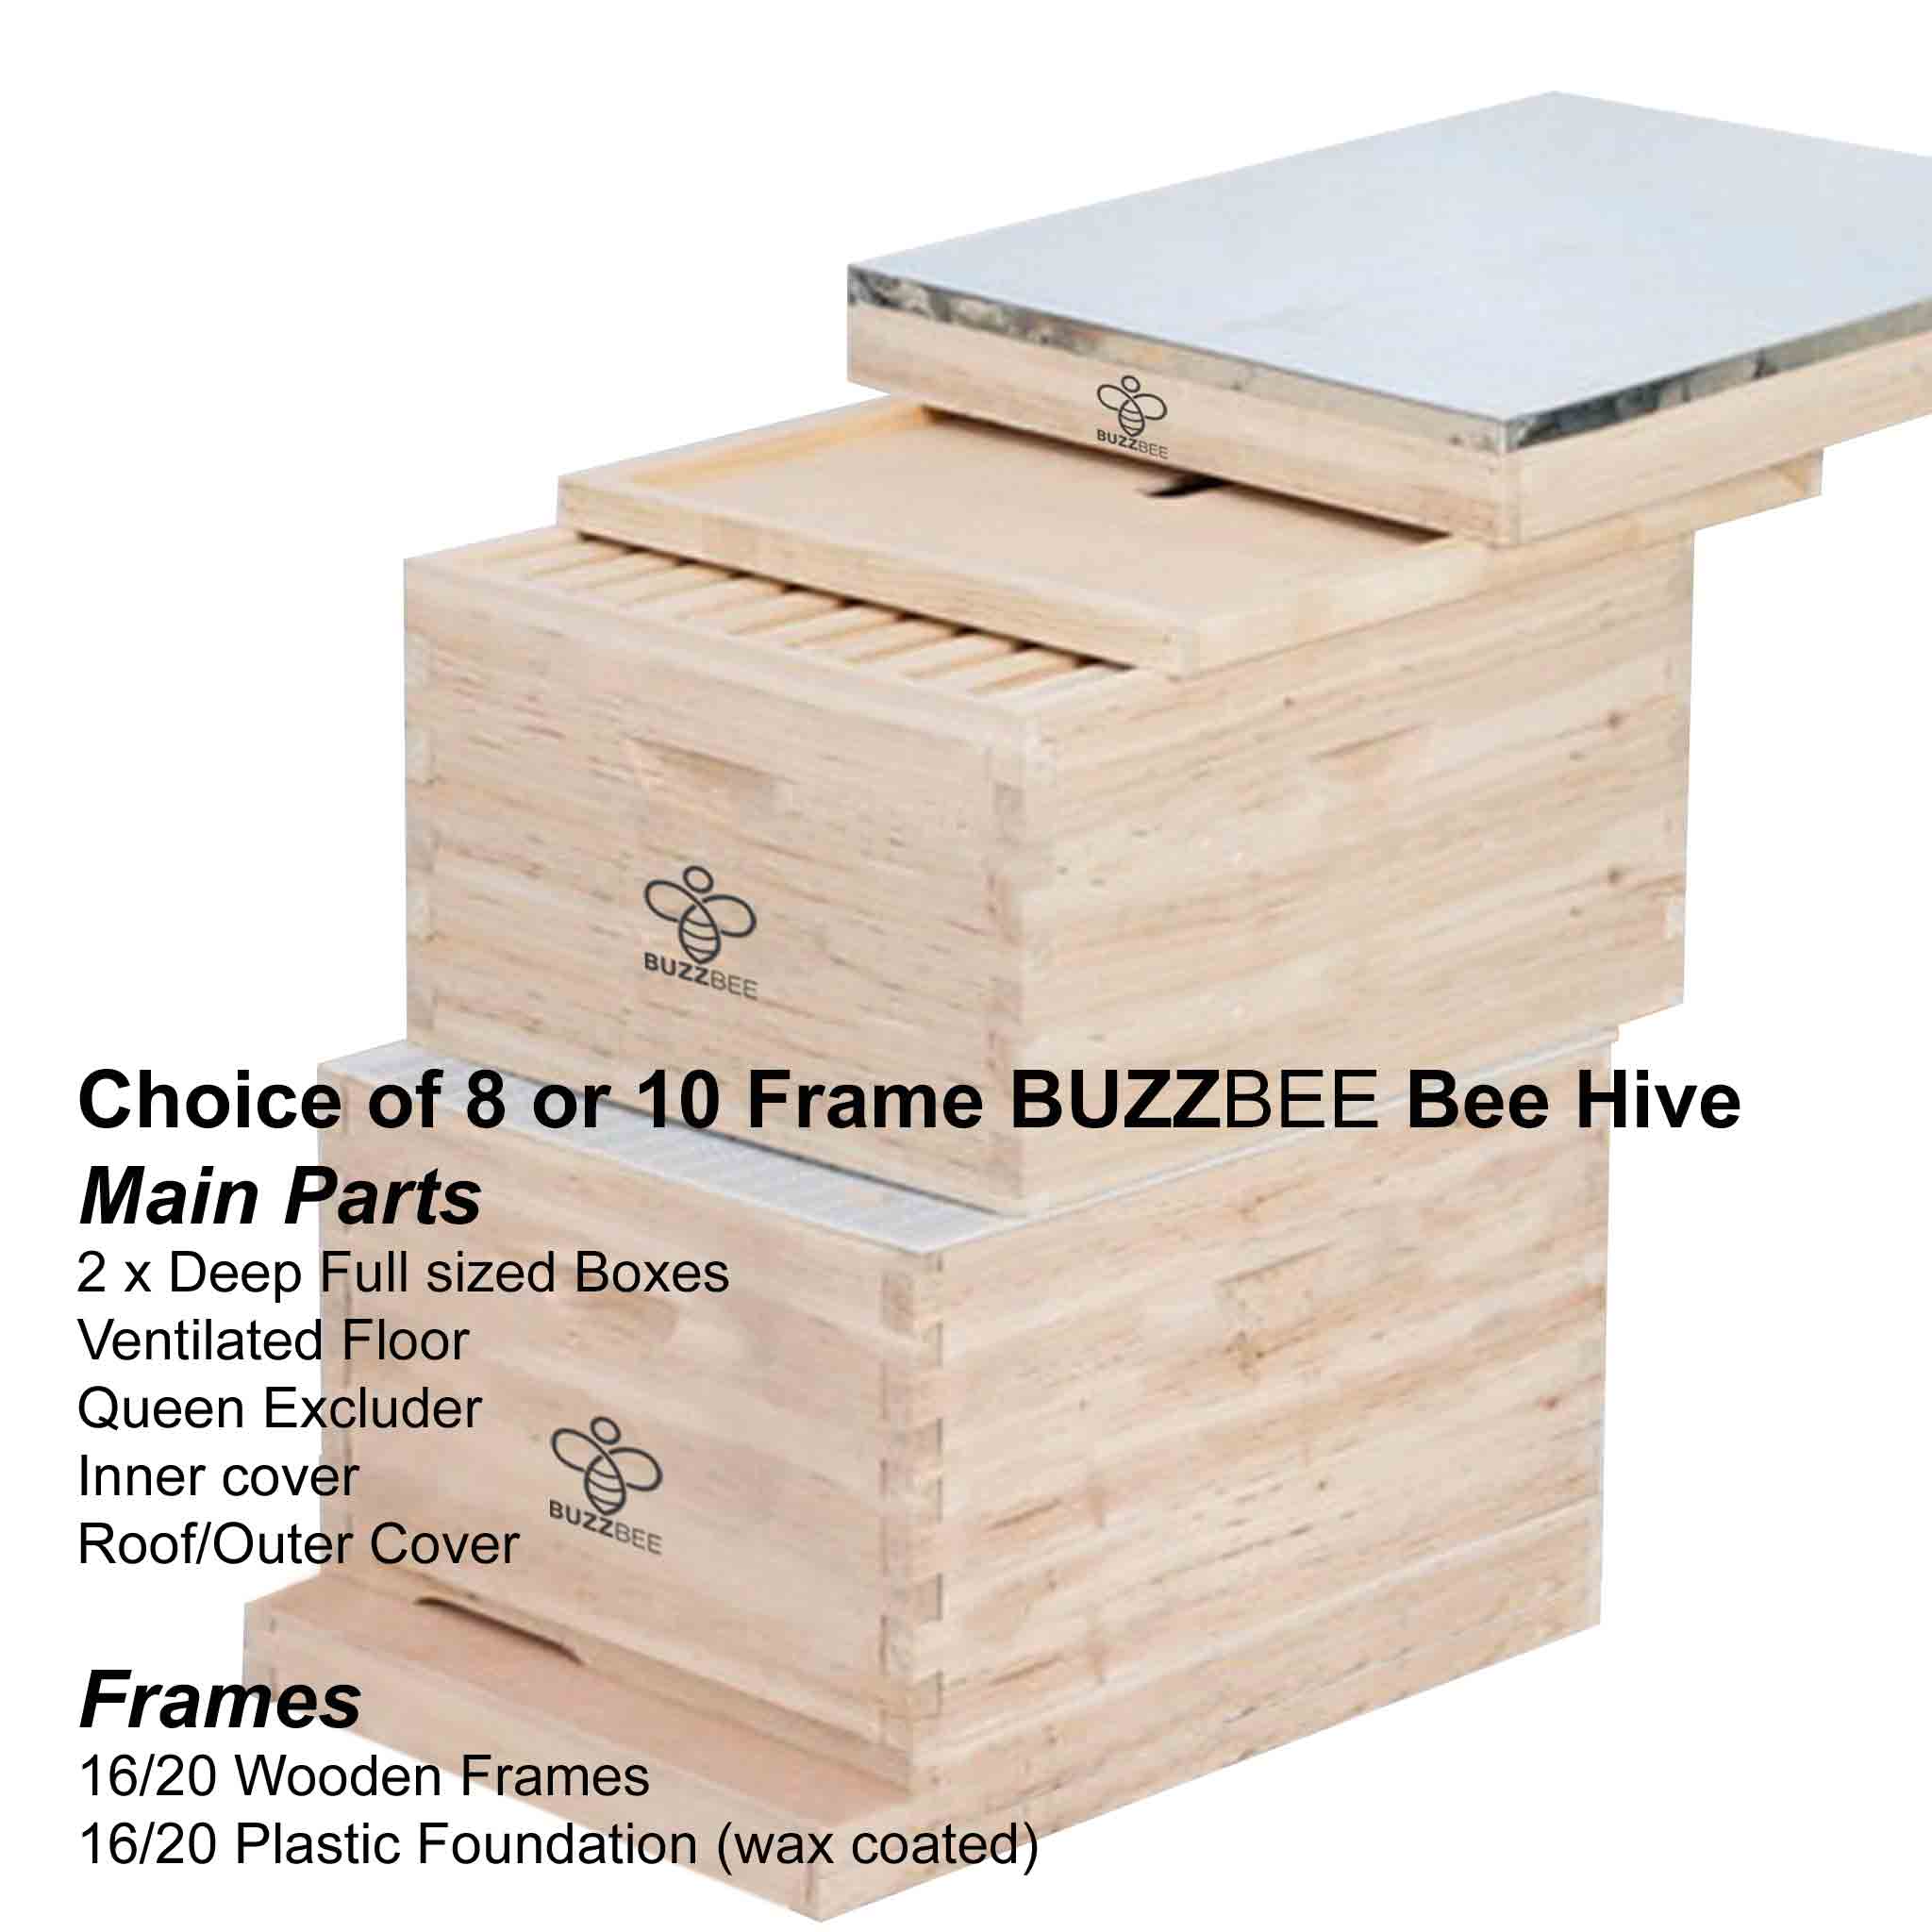 Basic Beekeeping Starter Kit Package - Kit collection by Buzzbee Beekeeping Supplies